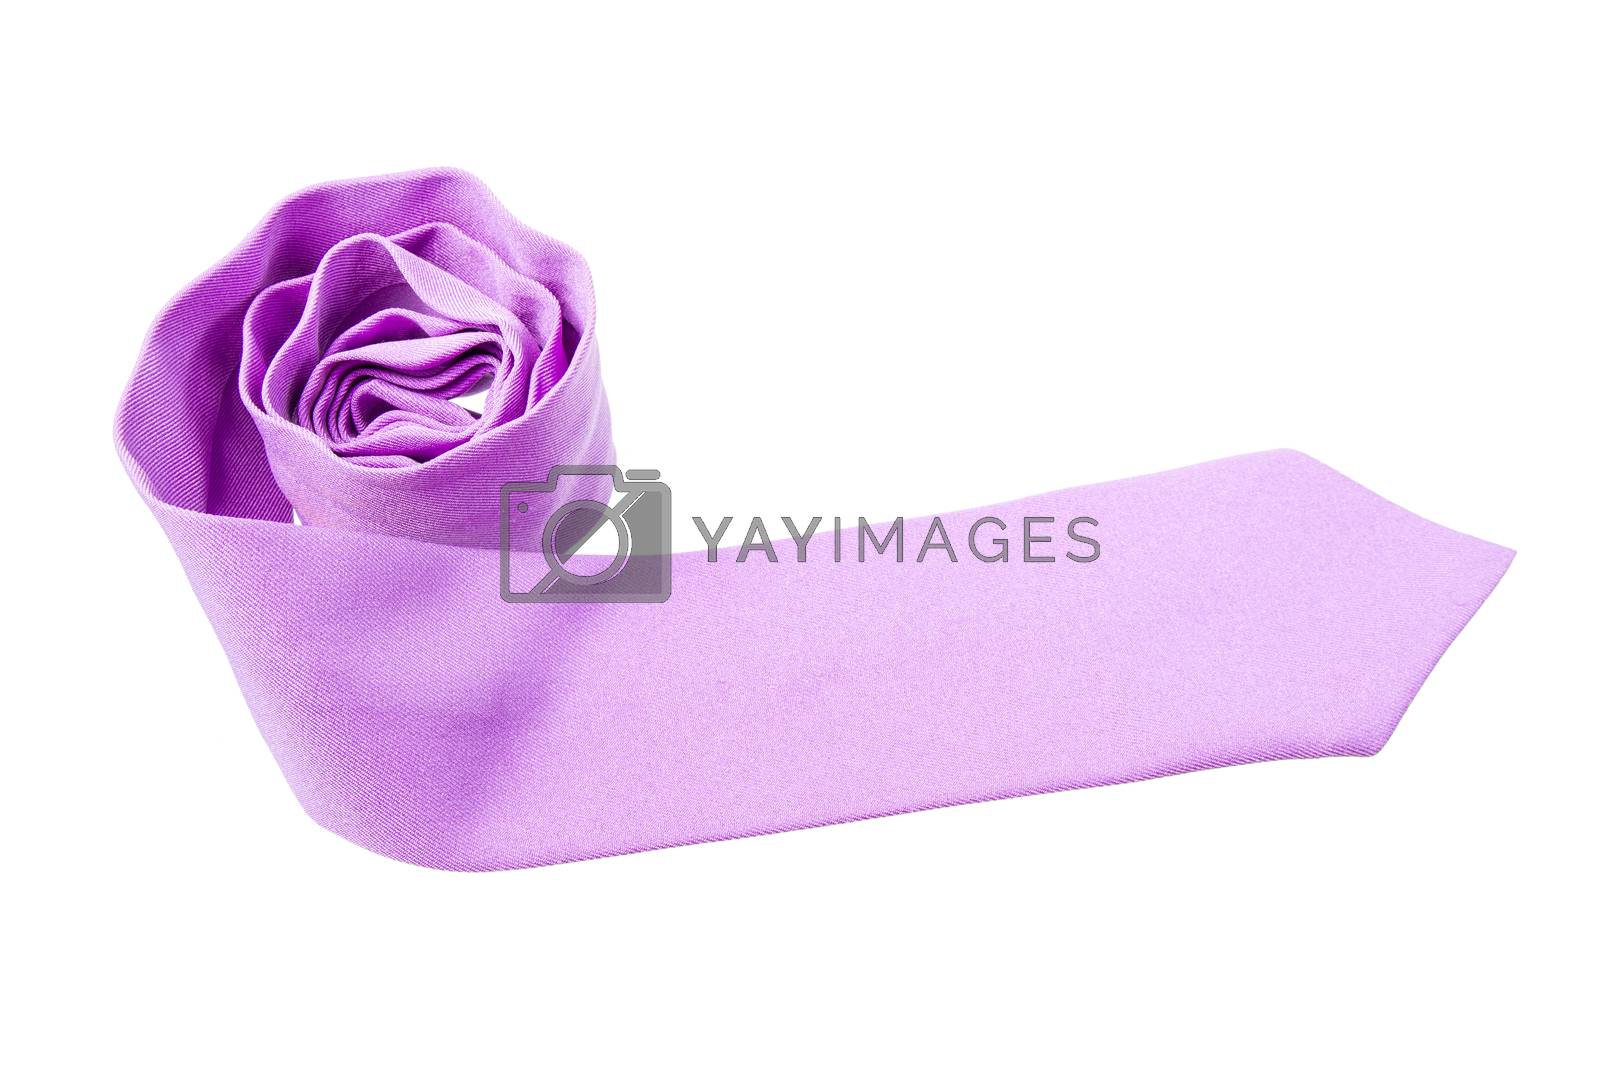 Royalty free image of plain purple business neck tie by kasinv